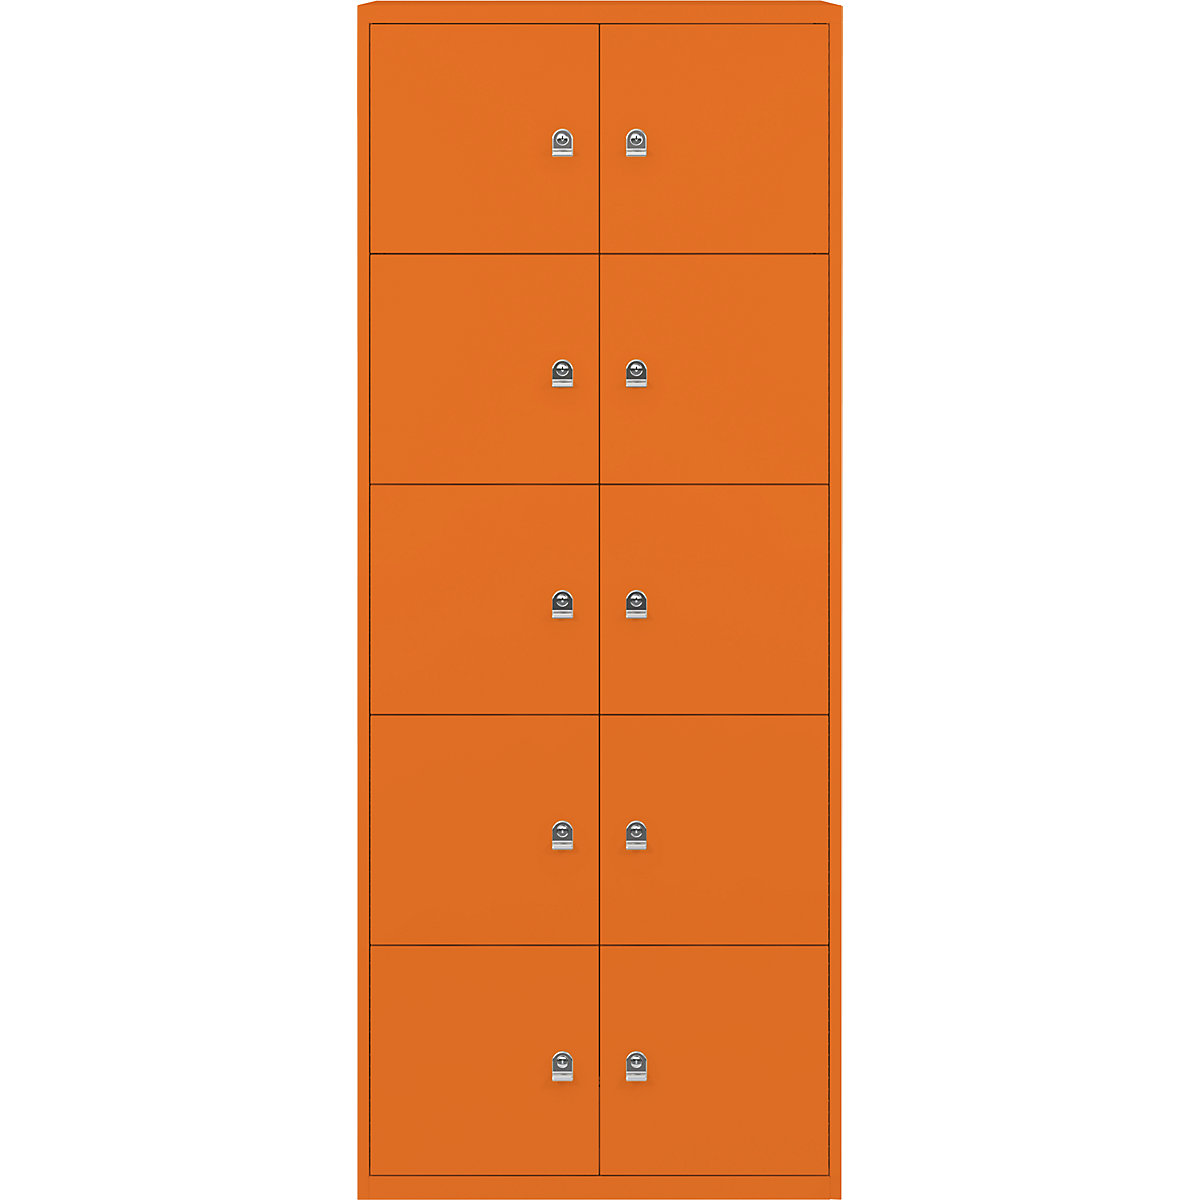 BISLEY – LateralFile™ lodge, with 10 lockable compartments, height 375 mm each, orange